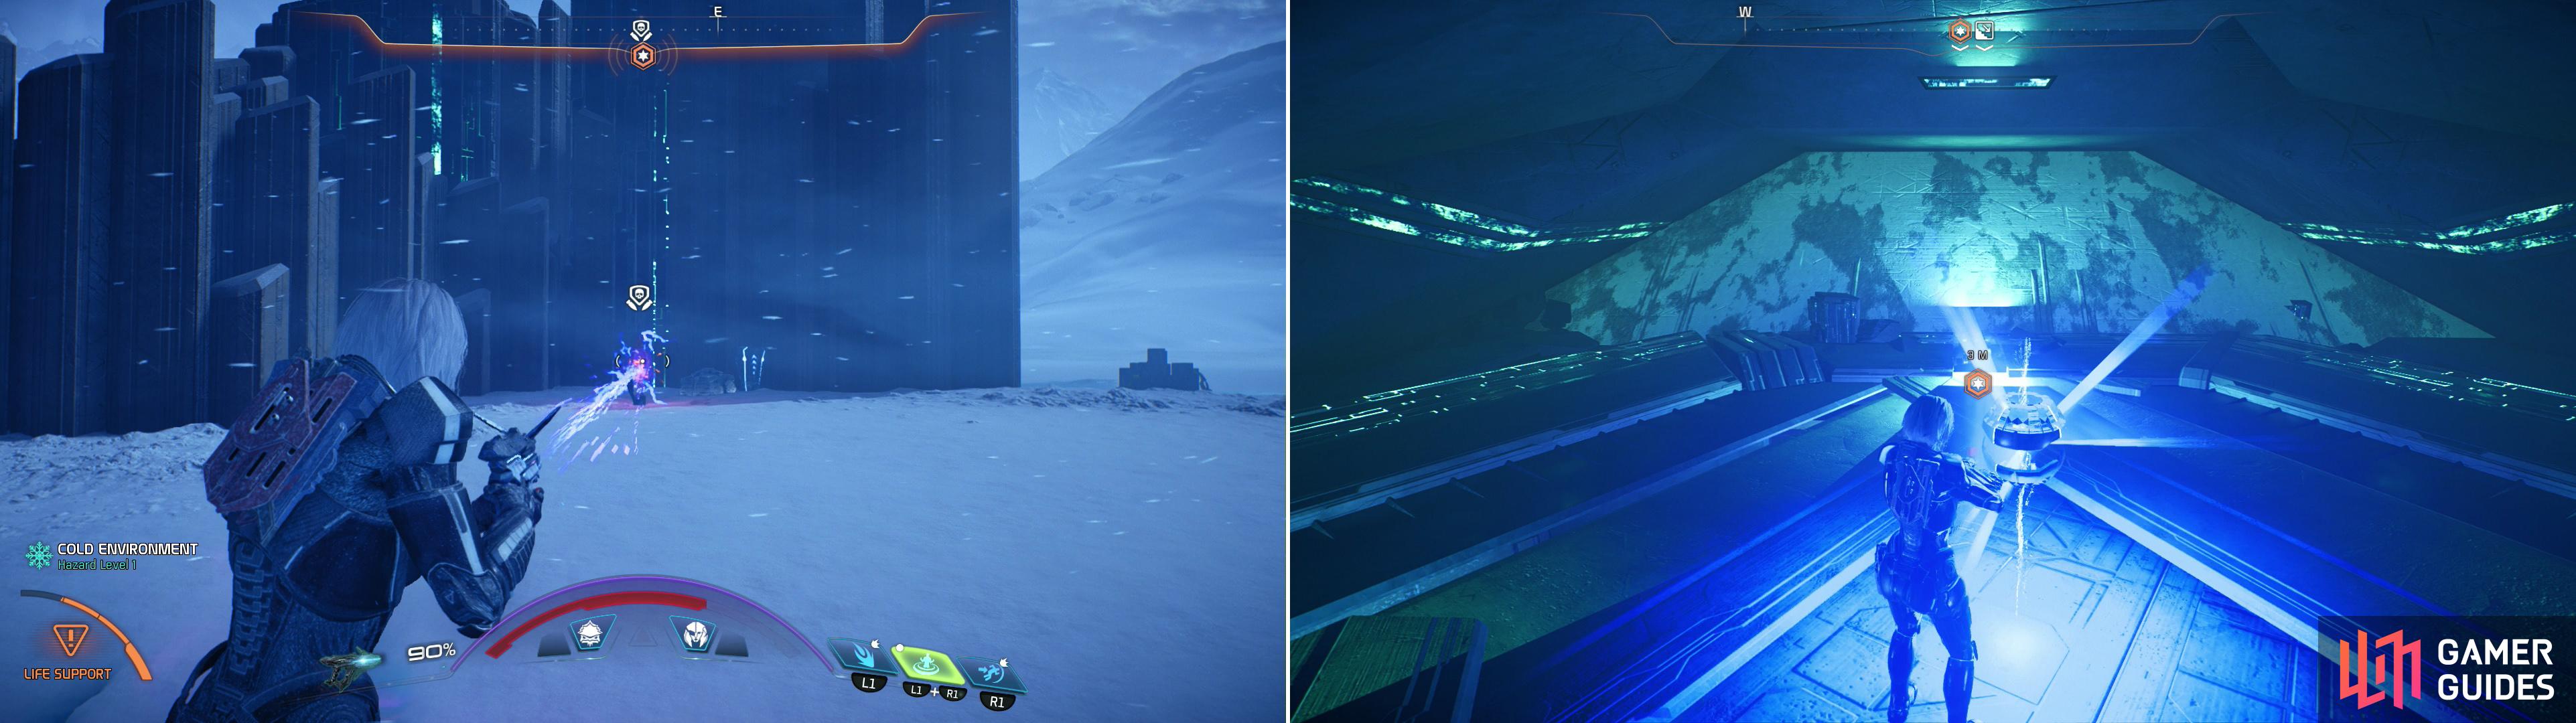 Destroy the Kett Devices randomly found near unmarked Remnant ruins (left) until you get a navpoint that leads you to a large, underground Remnant structure (right).